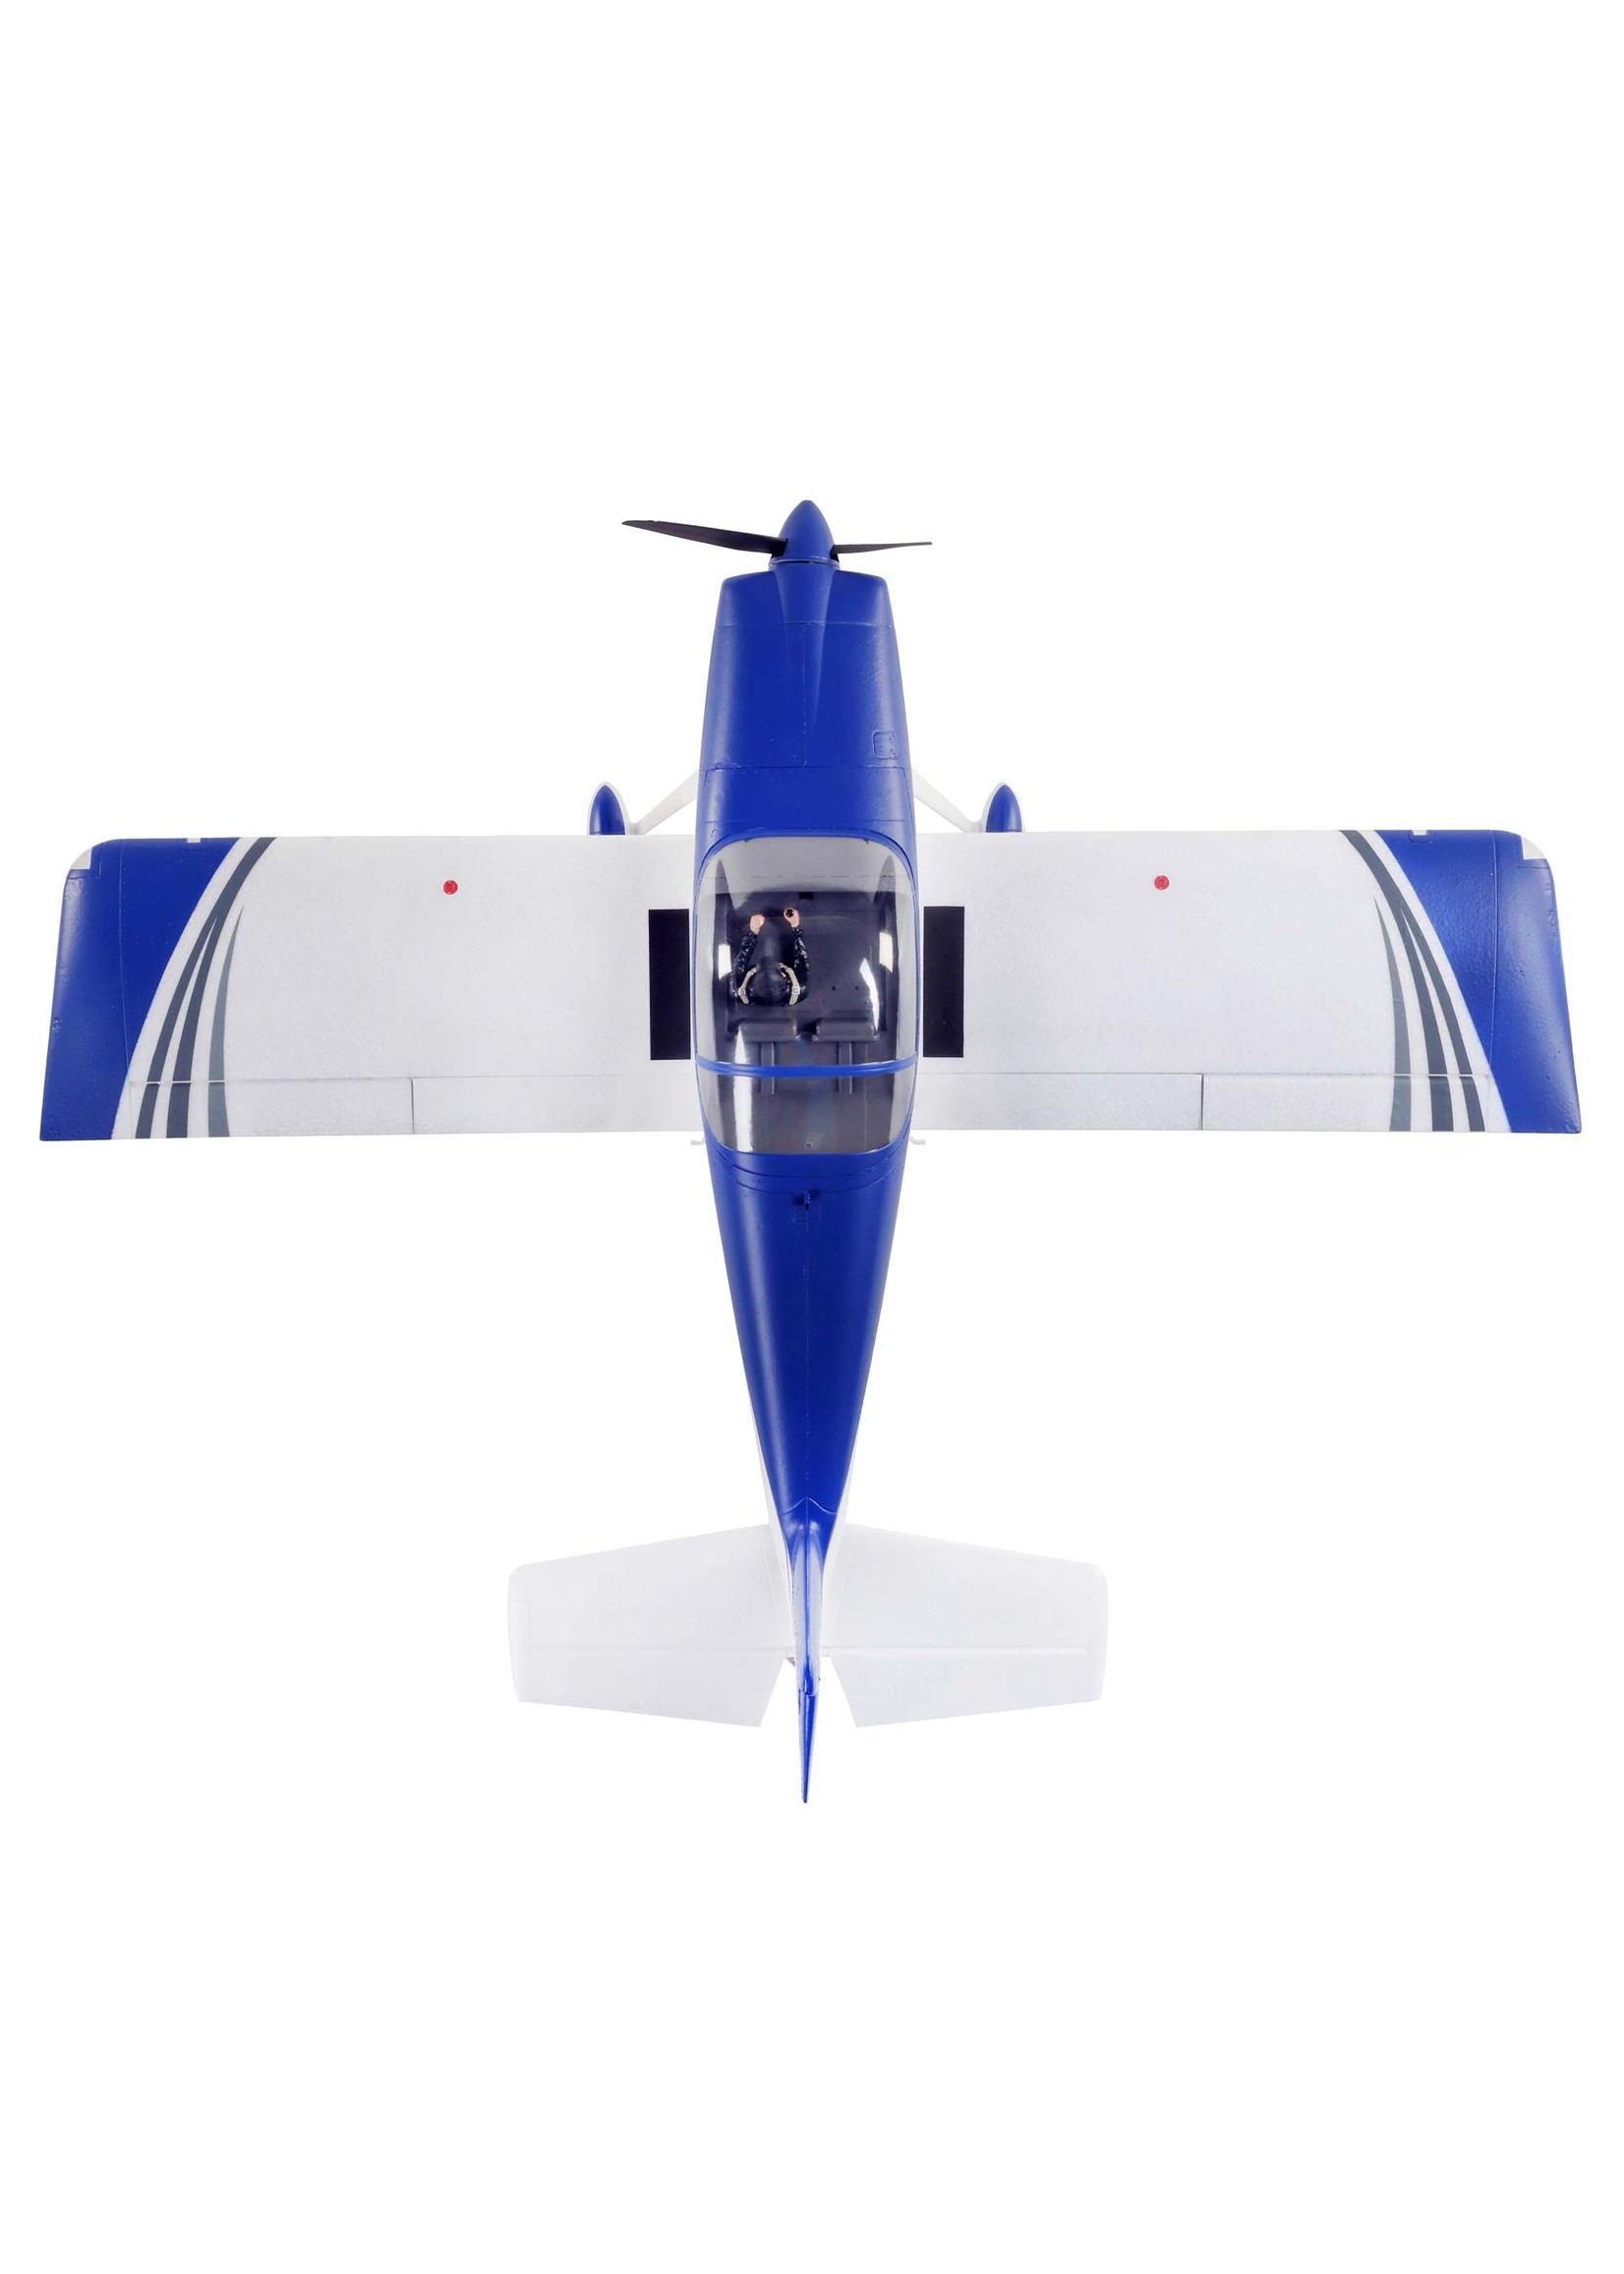 E-flite EFL01850 - RV-7 1.1m BNF Basic with SAFE Select and AS3X